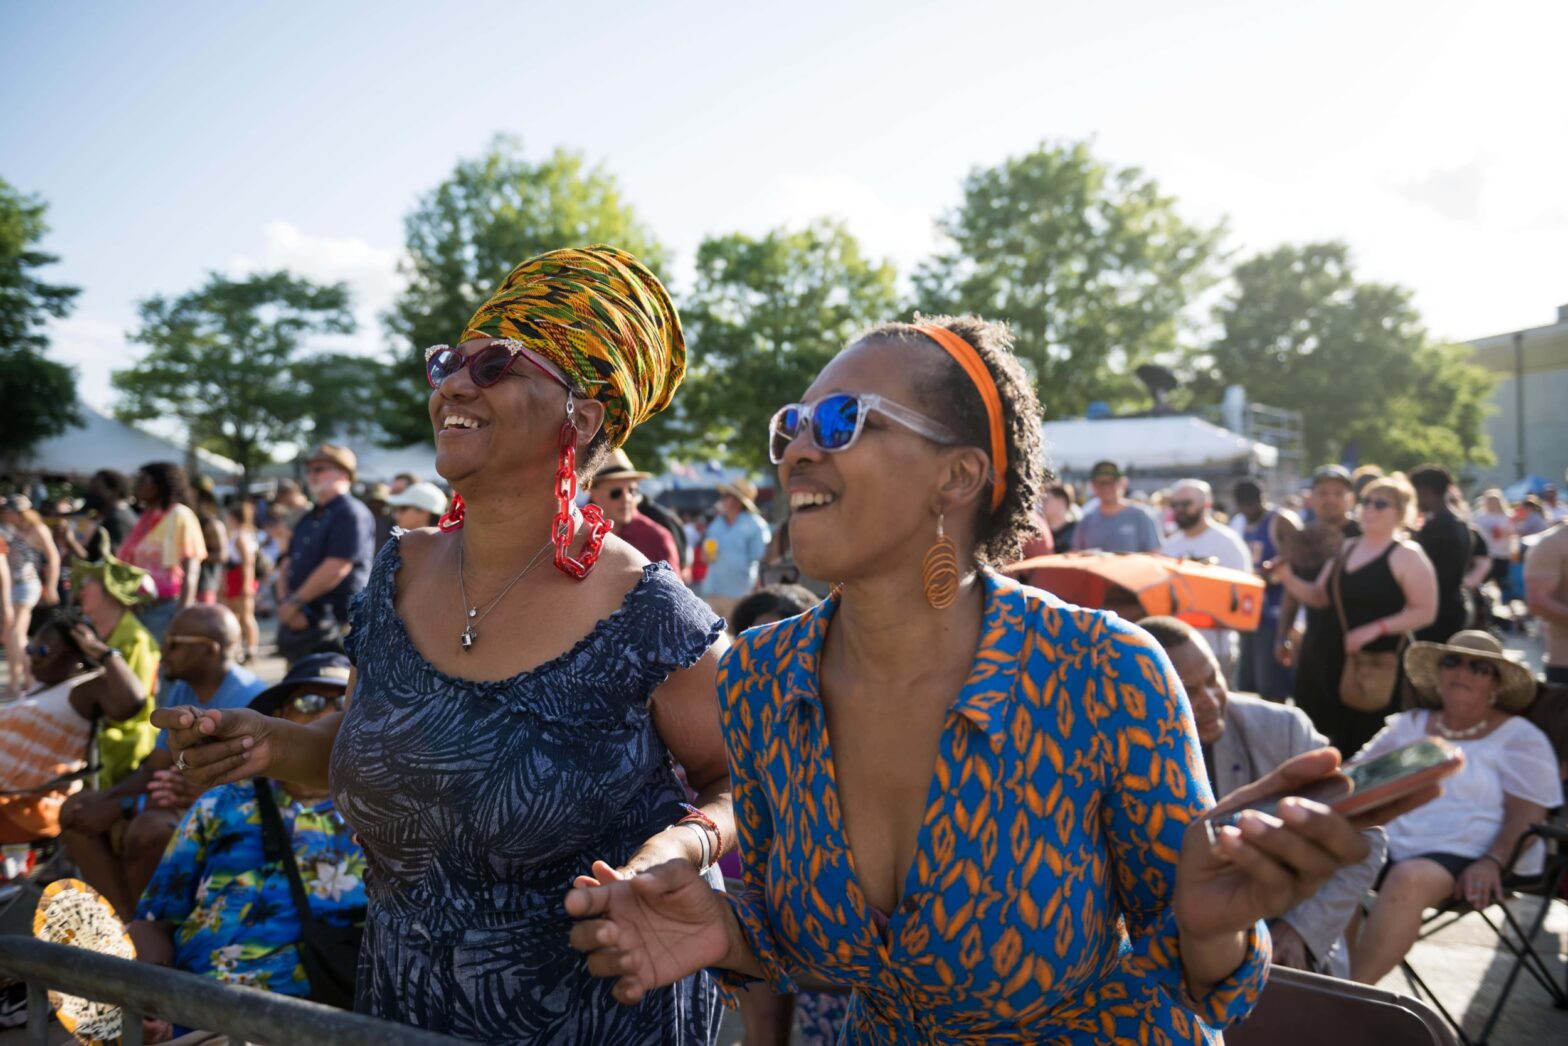 Two women of color in sunglasses enjoying the festival